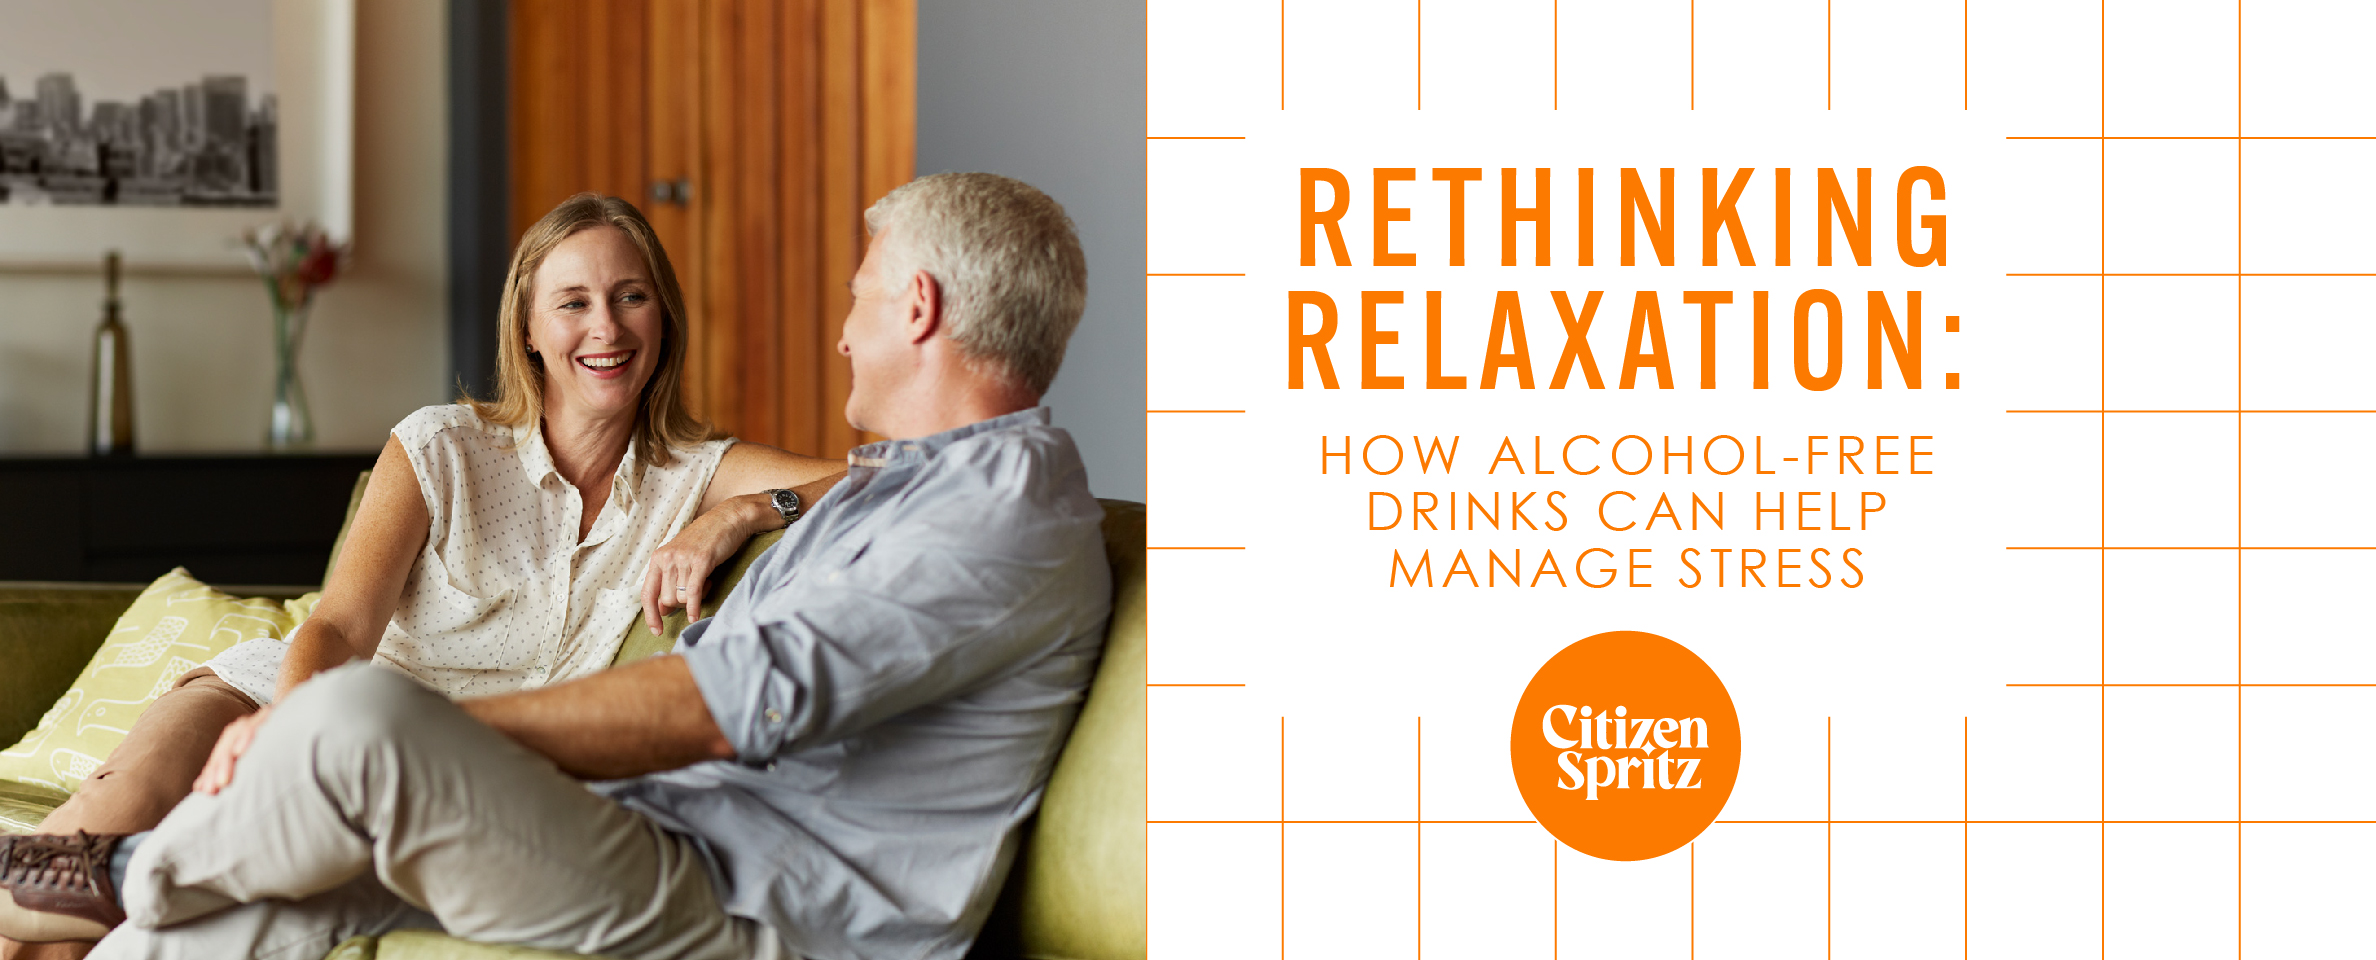 Rethinking relaxation - discover how Citizen Spritz can help you unwind, destress & feel more refreshed.